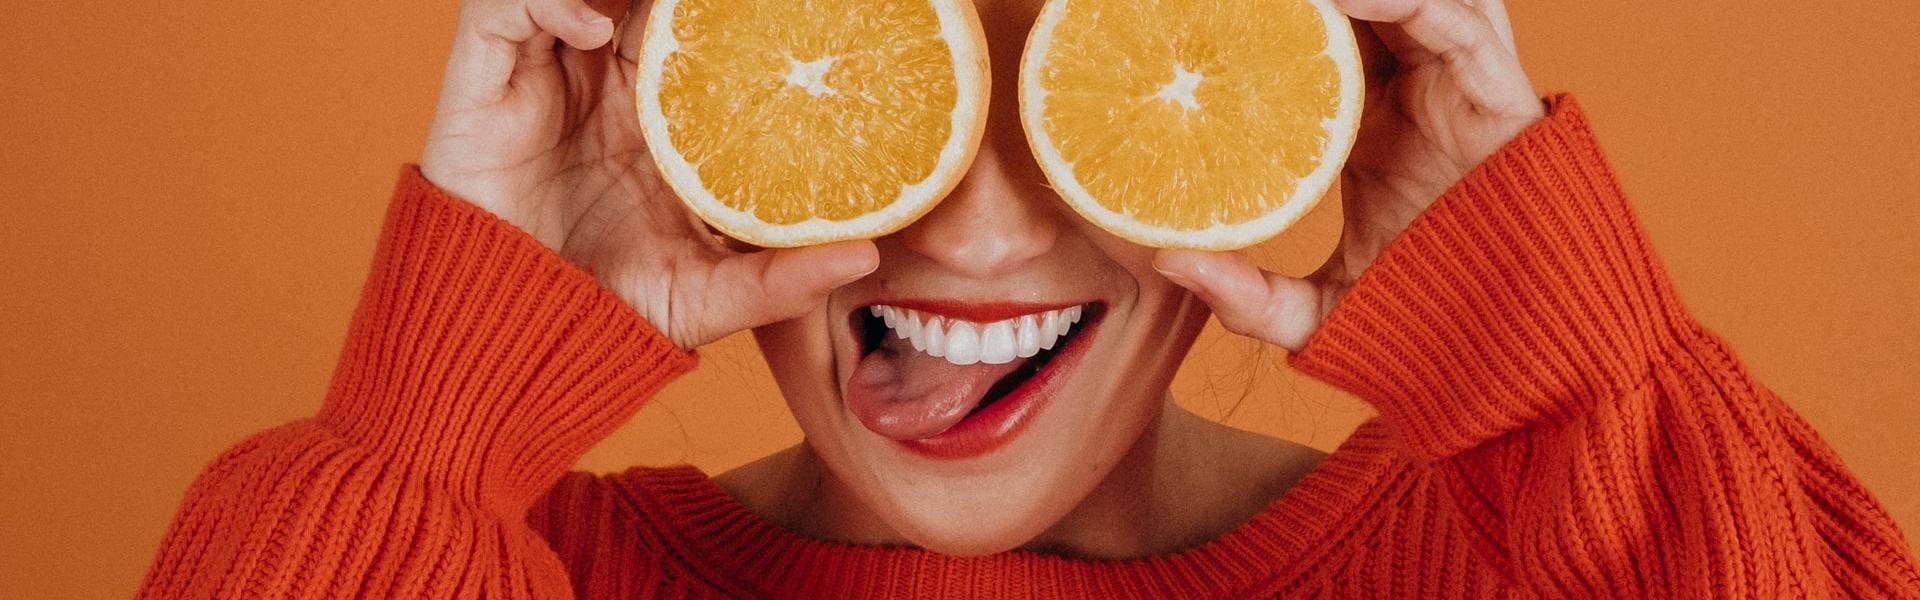 smiling with an orange